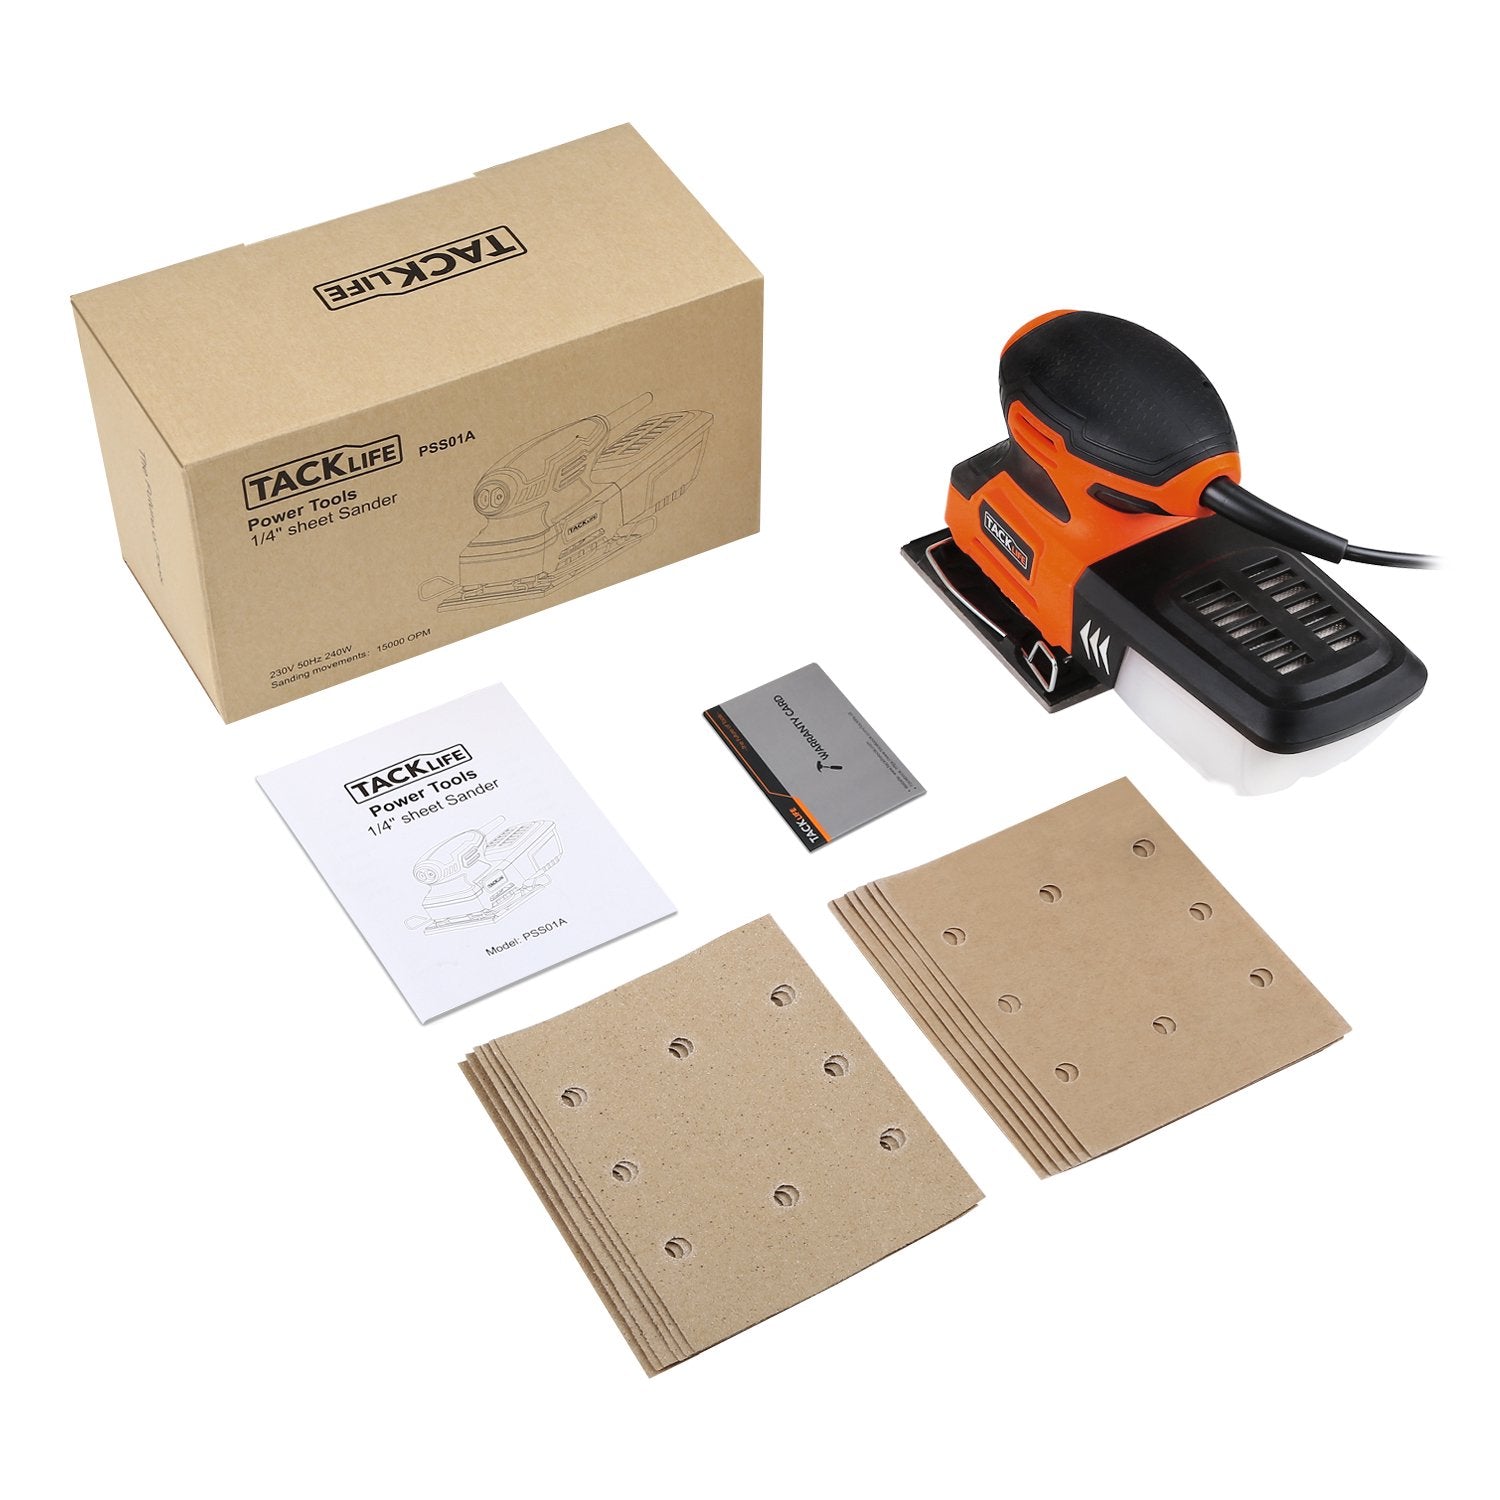 TACKLIFE 2.2A 1/4 Sheet Sander with Copper Motor, Dust-proof Switch and Soft Rubber Protection